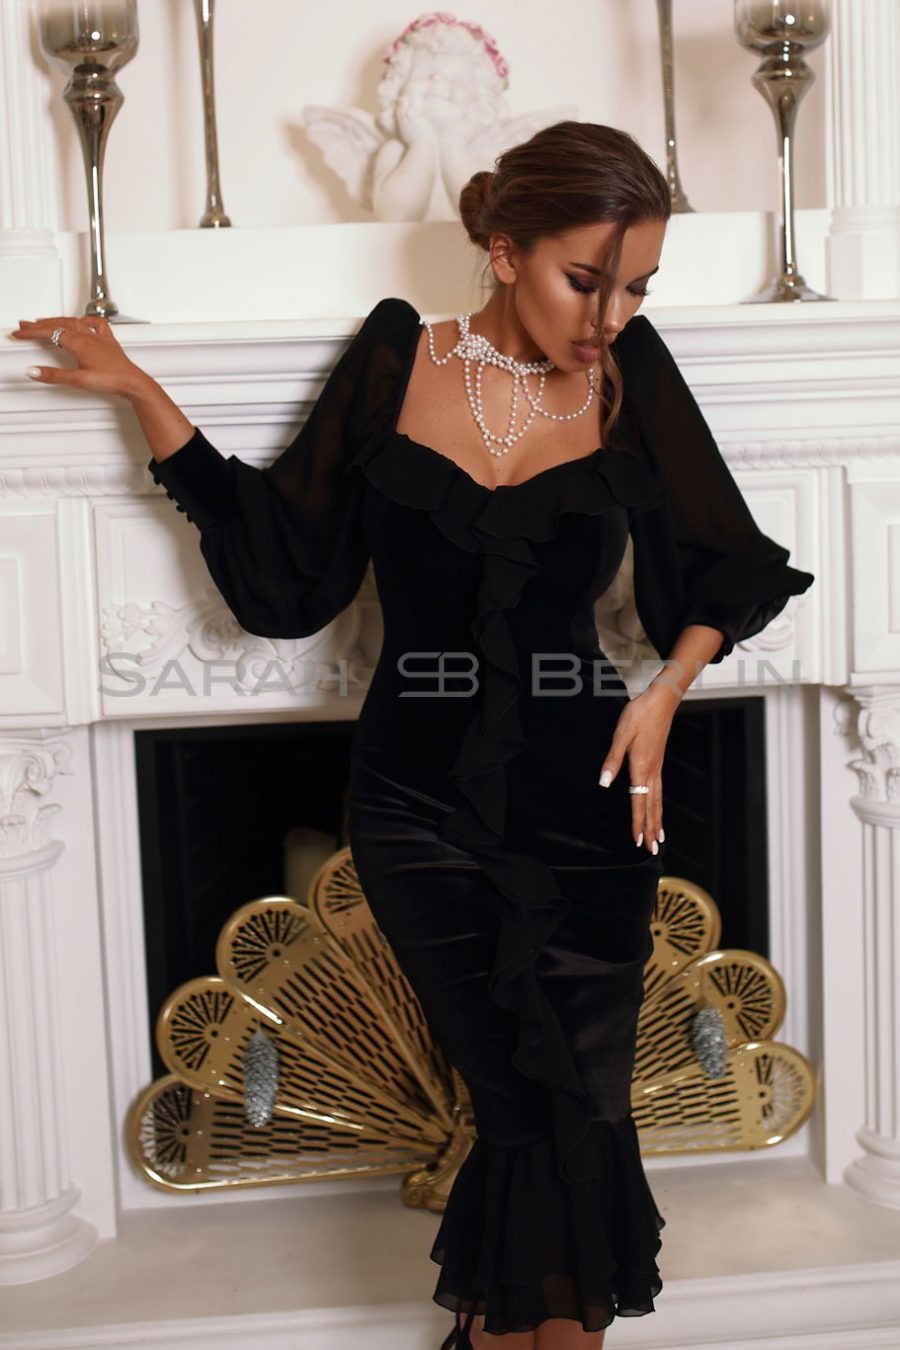 Velvet dress with ruffles and chiffon sleeves